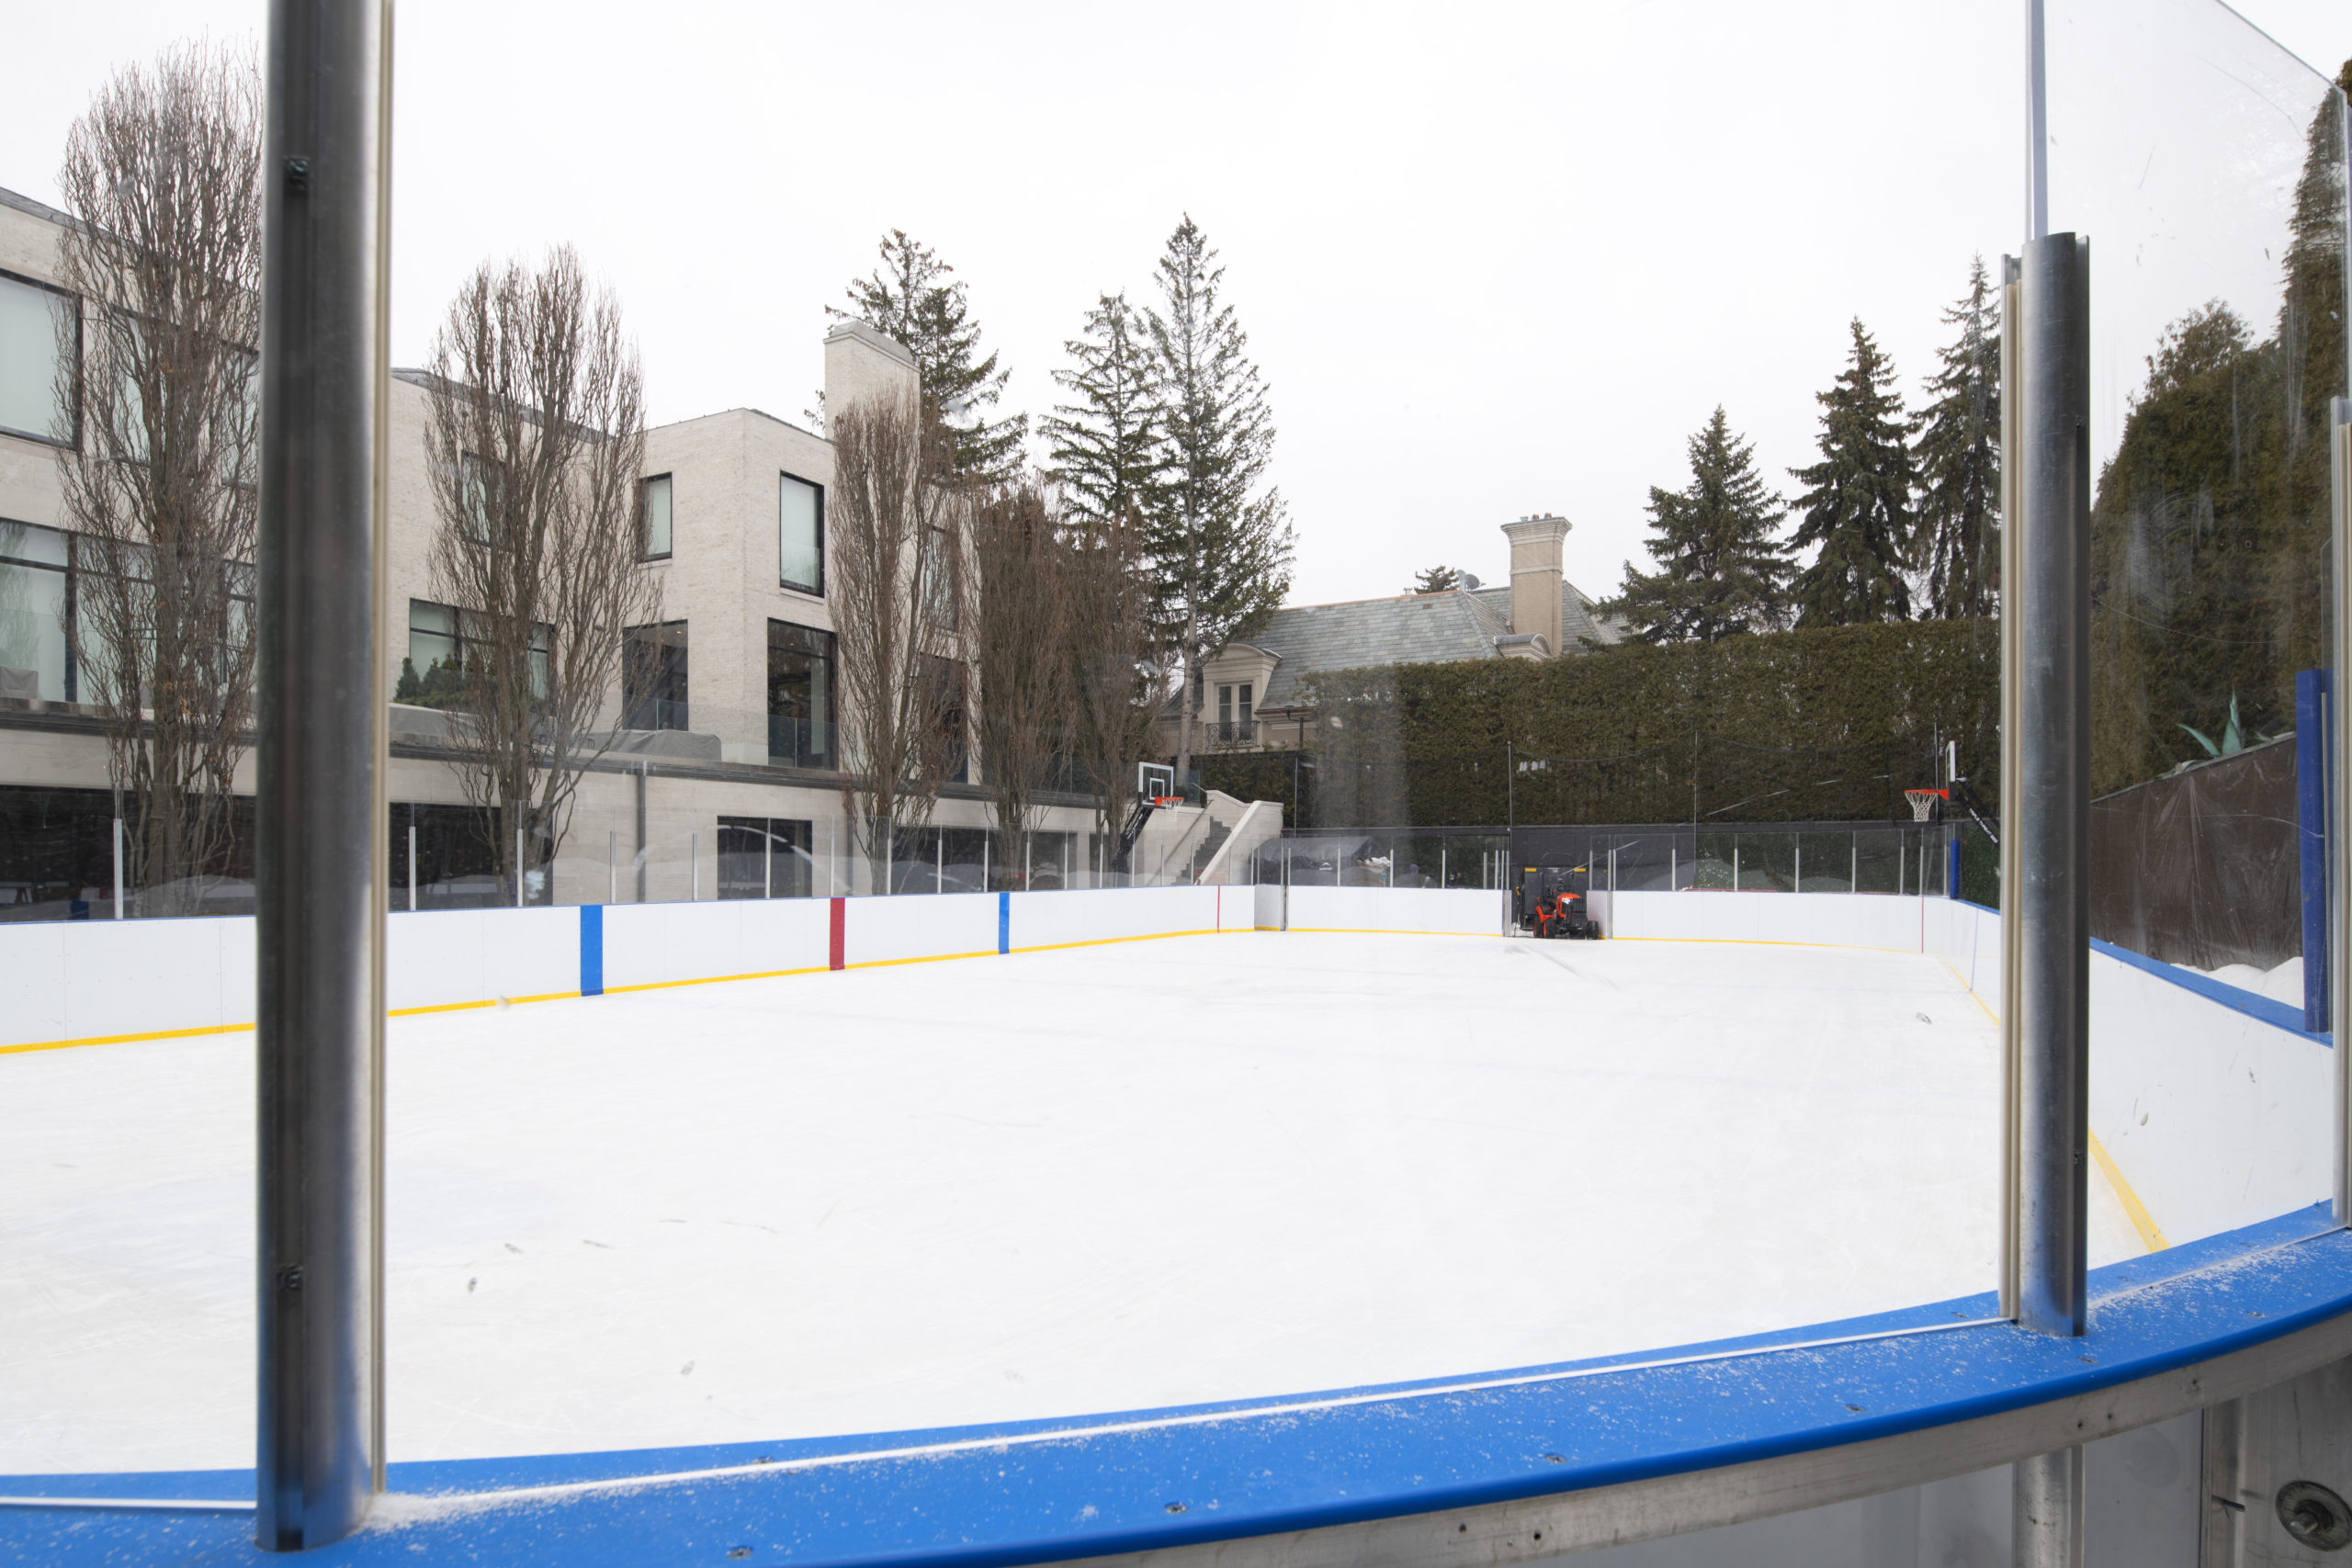 Portable refrigerated rink on a tennis court